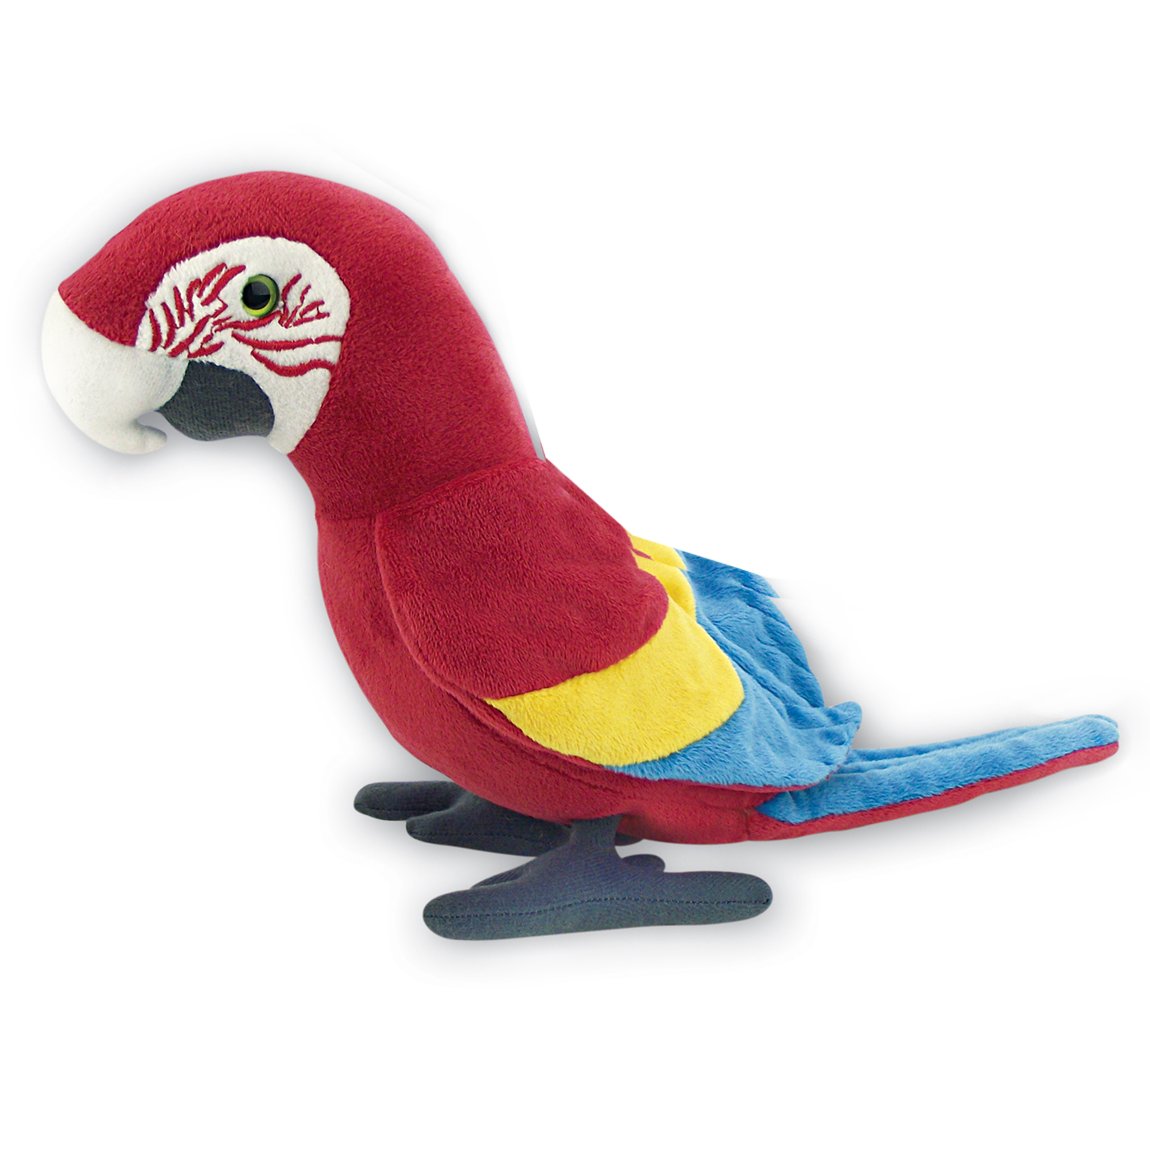 22cm Macaw Parrot Soft Toy Stuffed